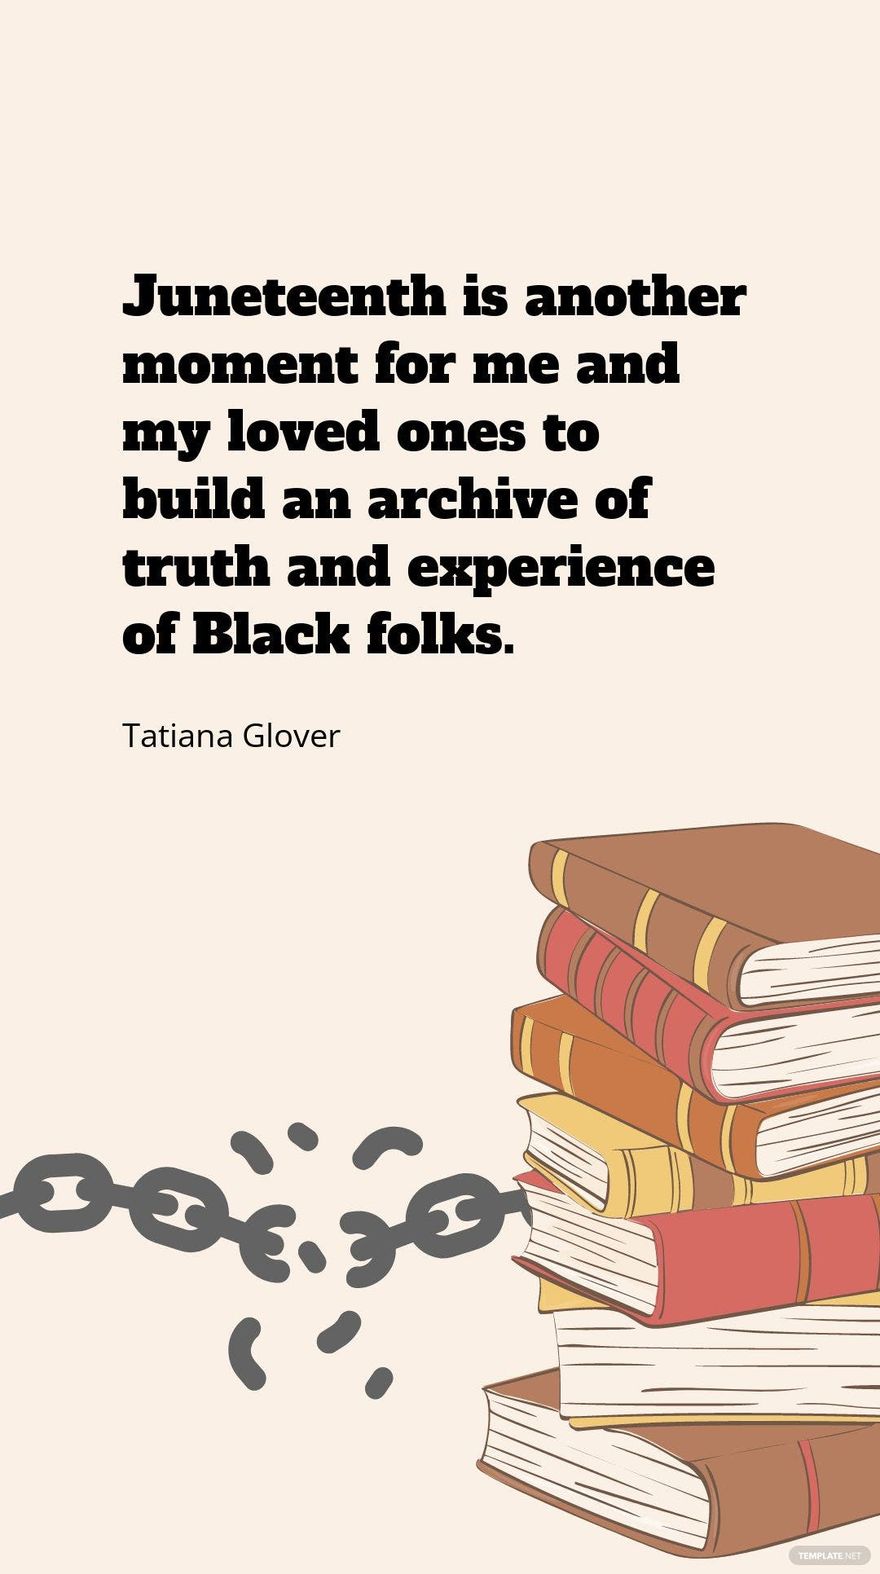 Free Tatiana Glover - Juneteenth is another moment for me and my loved ones to build an archive of truth and experience of Black folks.